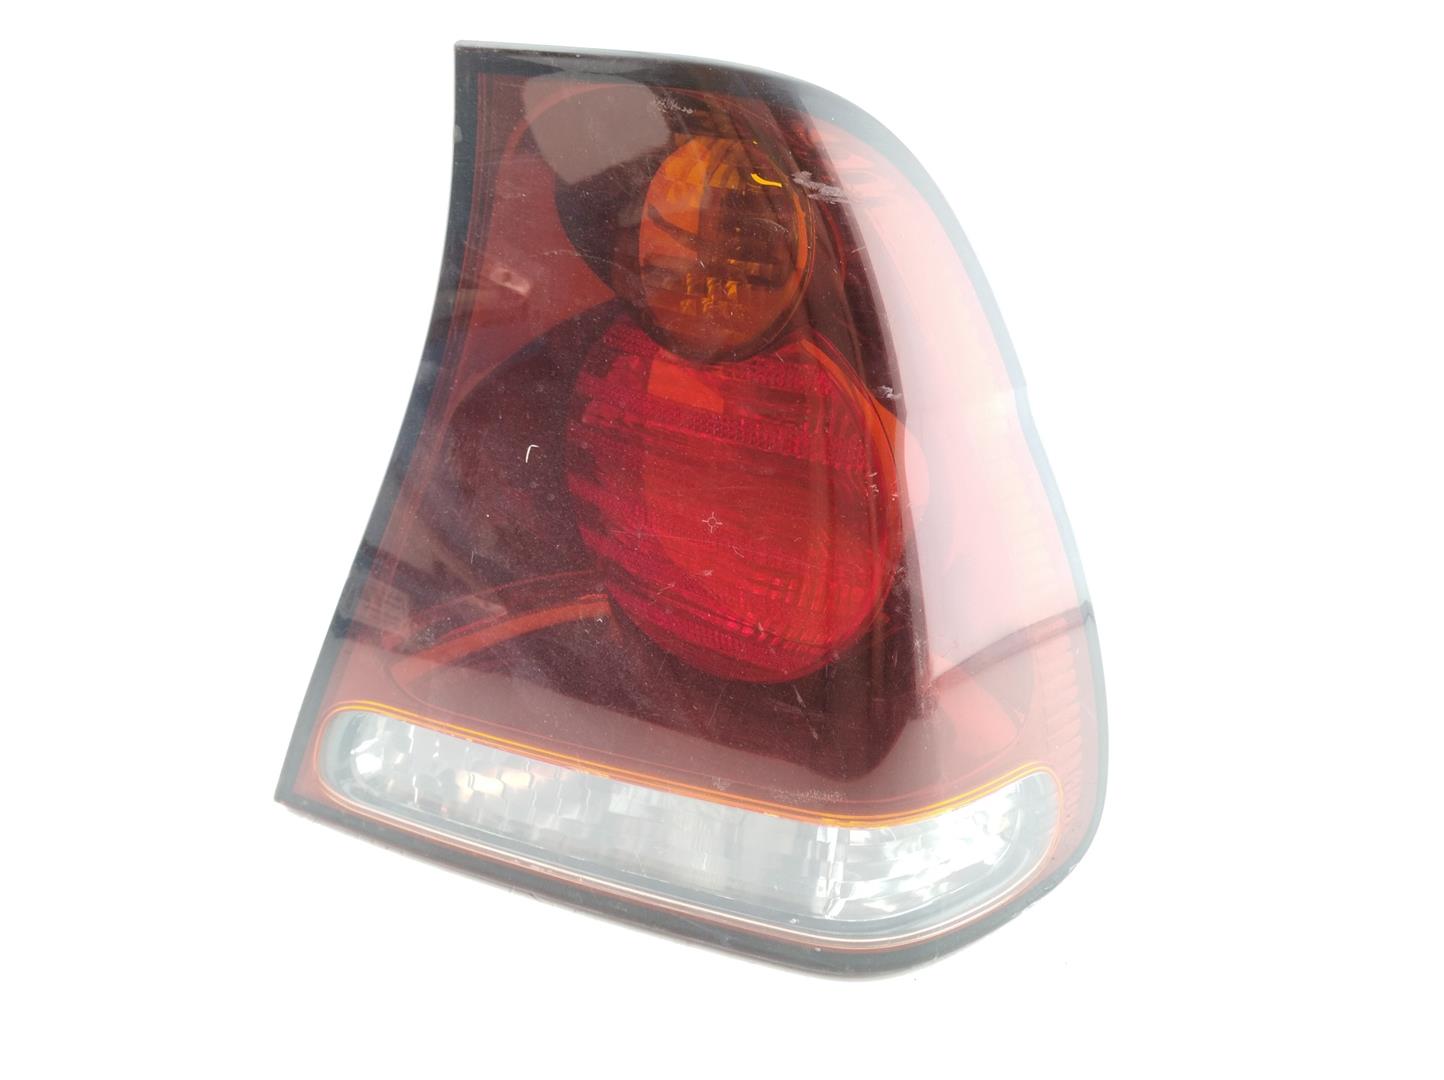 BMW 3 Series E46 (1997-2006) Rear Right Taillight Lamp 632169202389, 632169202389, 632169202389 24666344